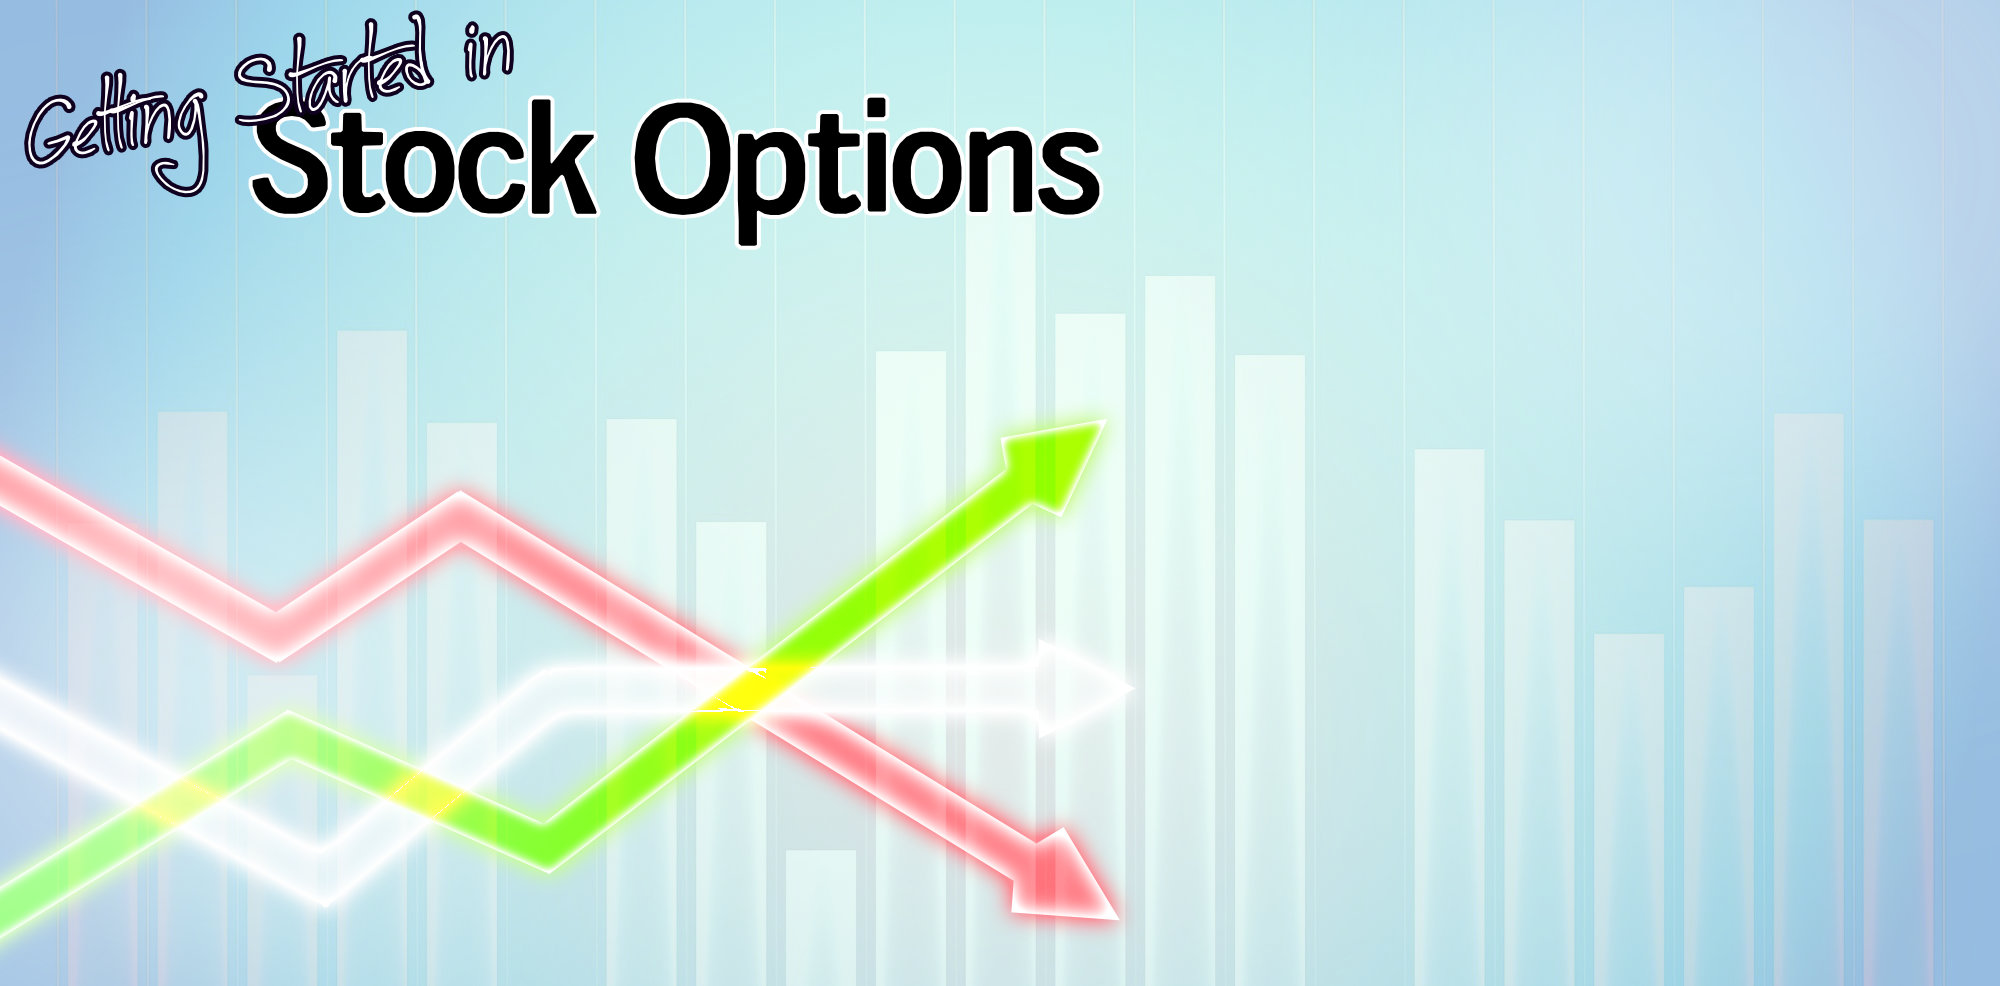 Get Started Trading Options